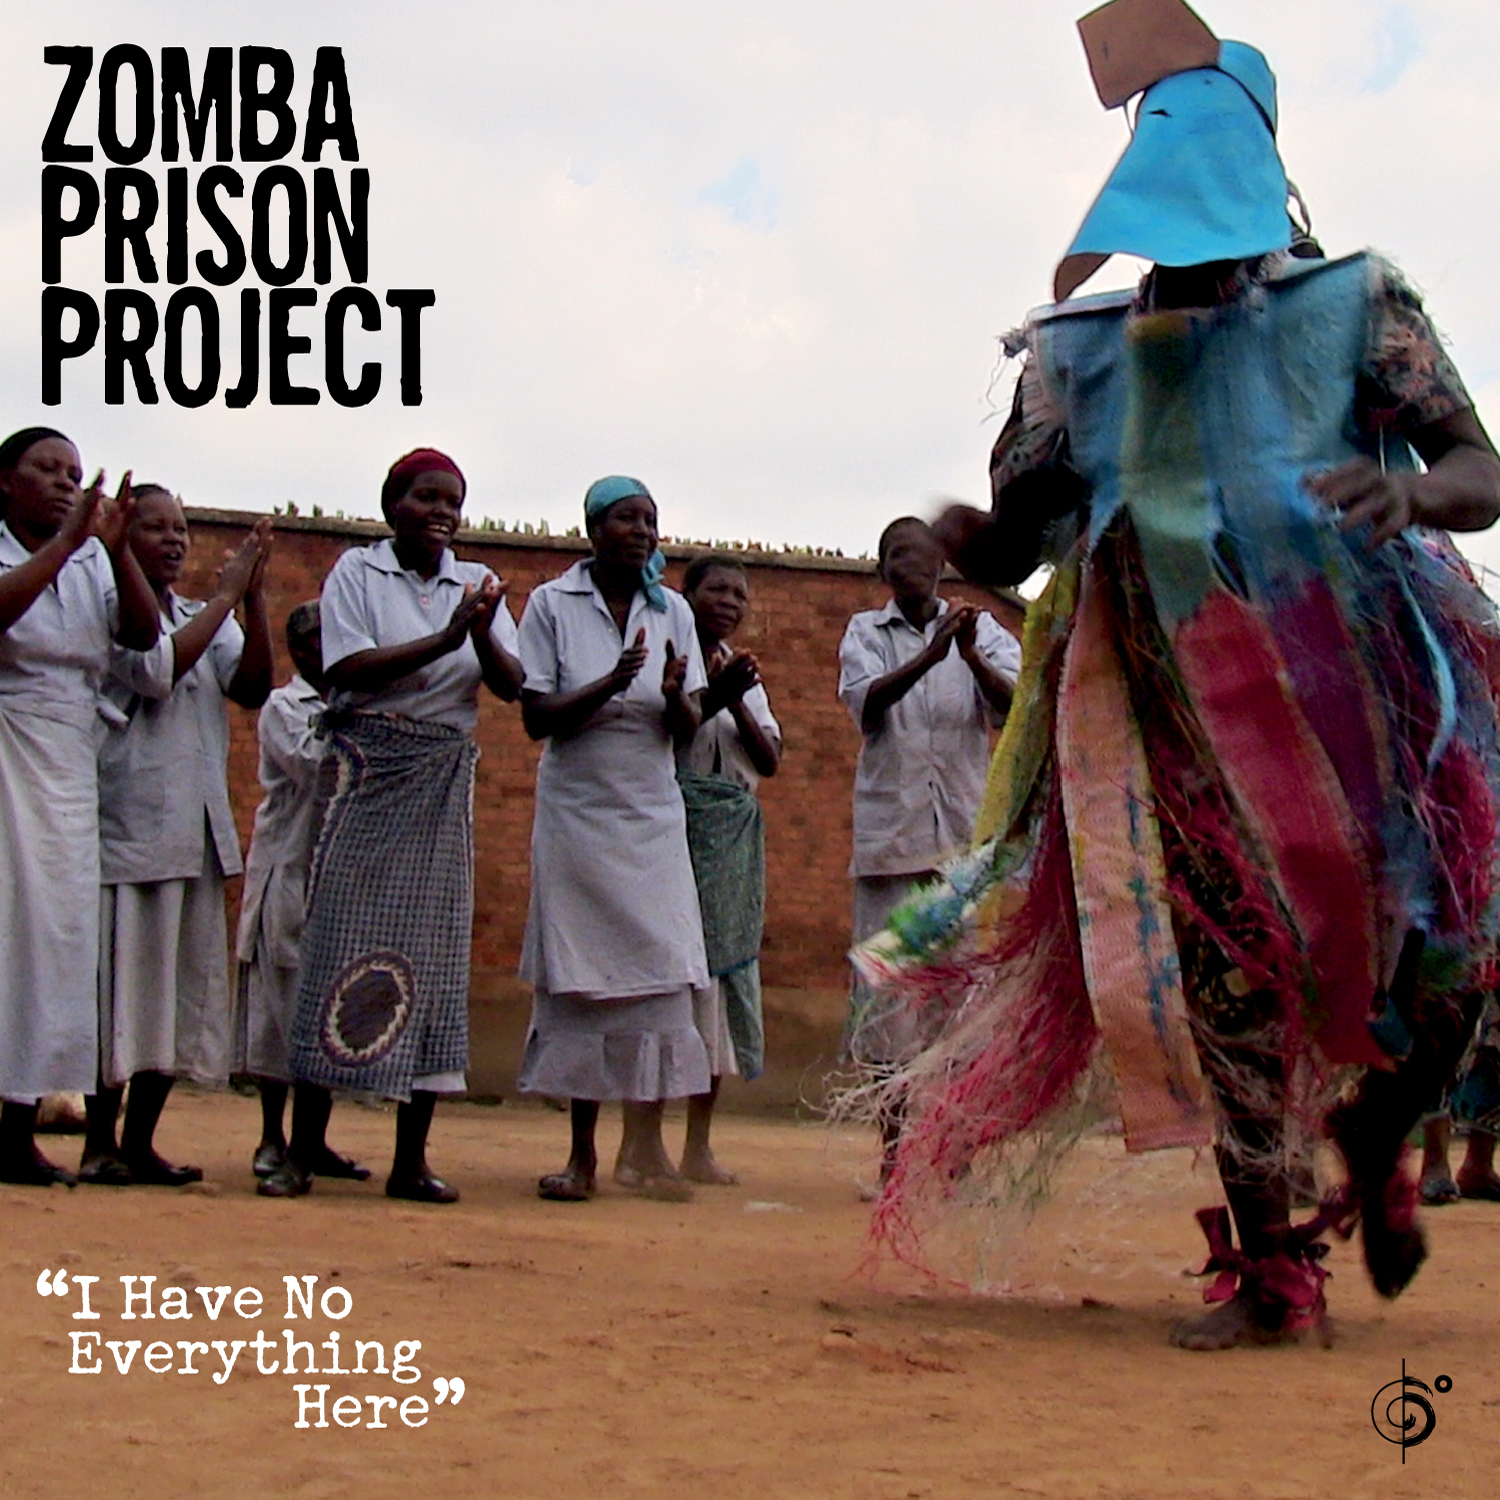 Zomba Prison Project – “I Have No Everything Here”